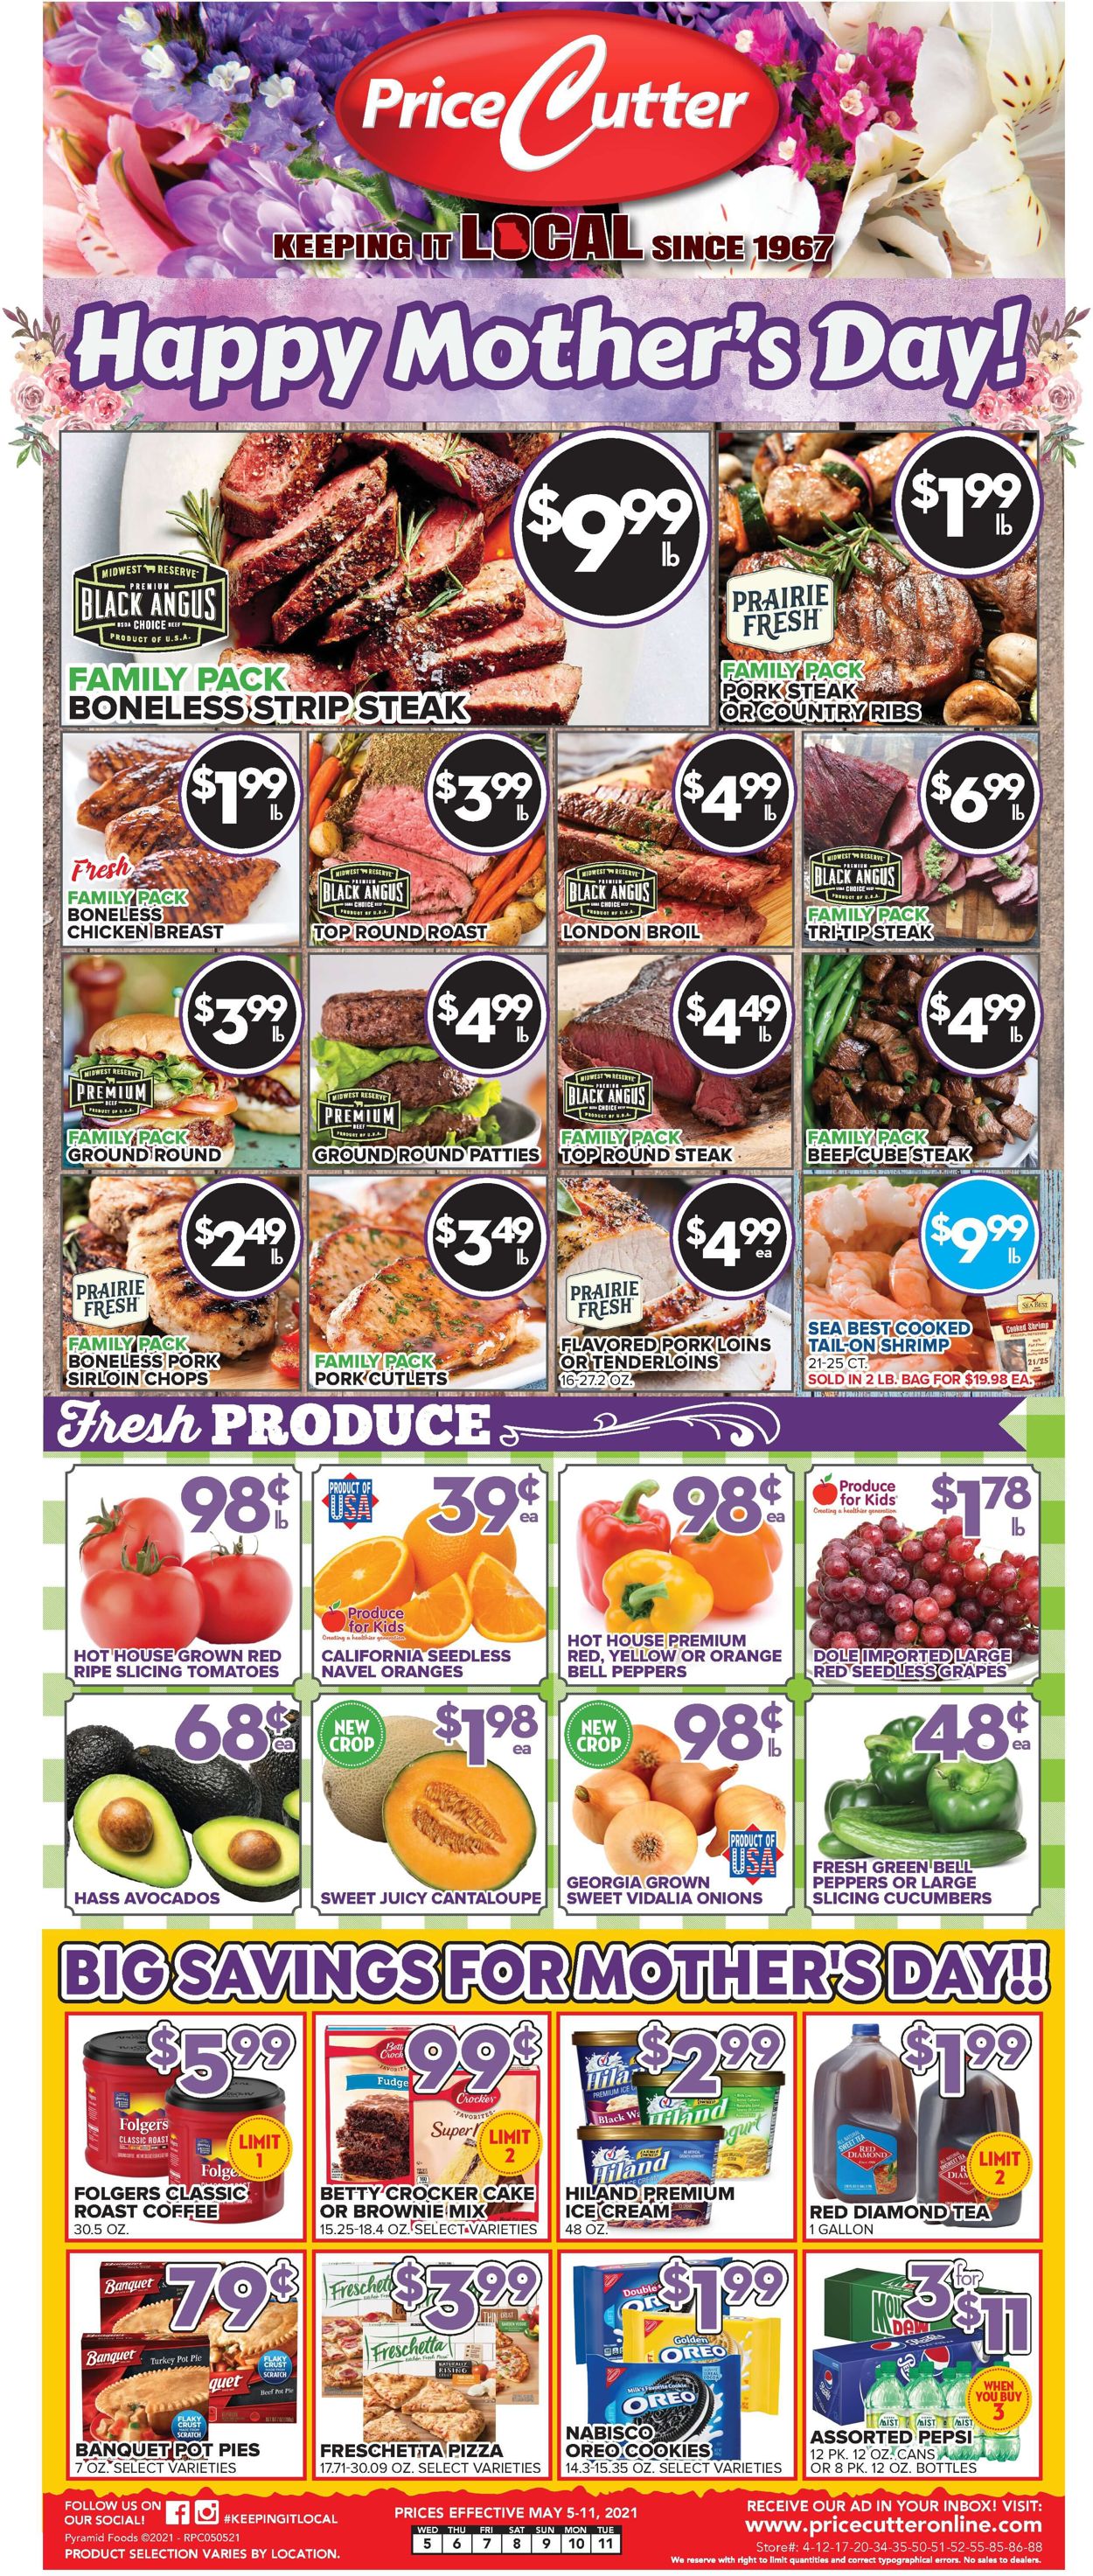 Price Cutter Weekly Ad Circular - valid 05/05-05/11/2021